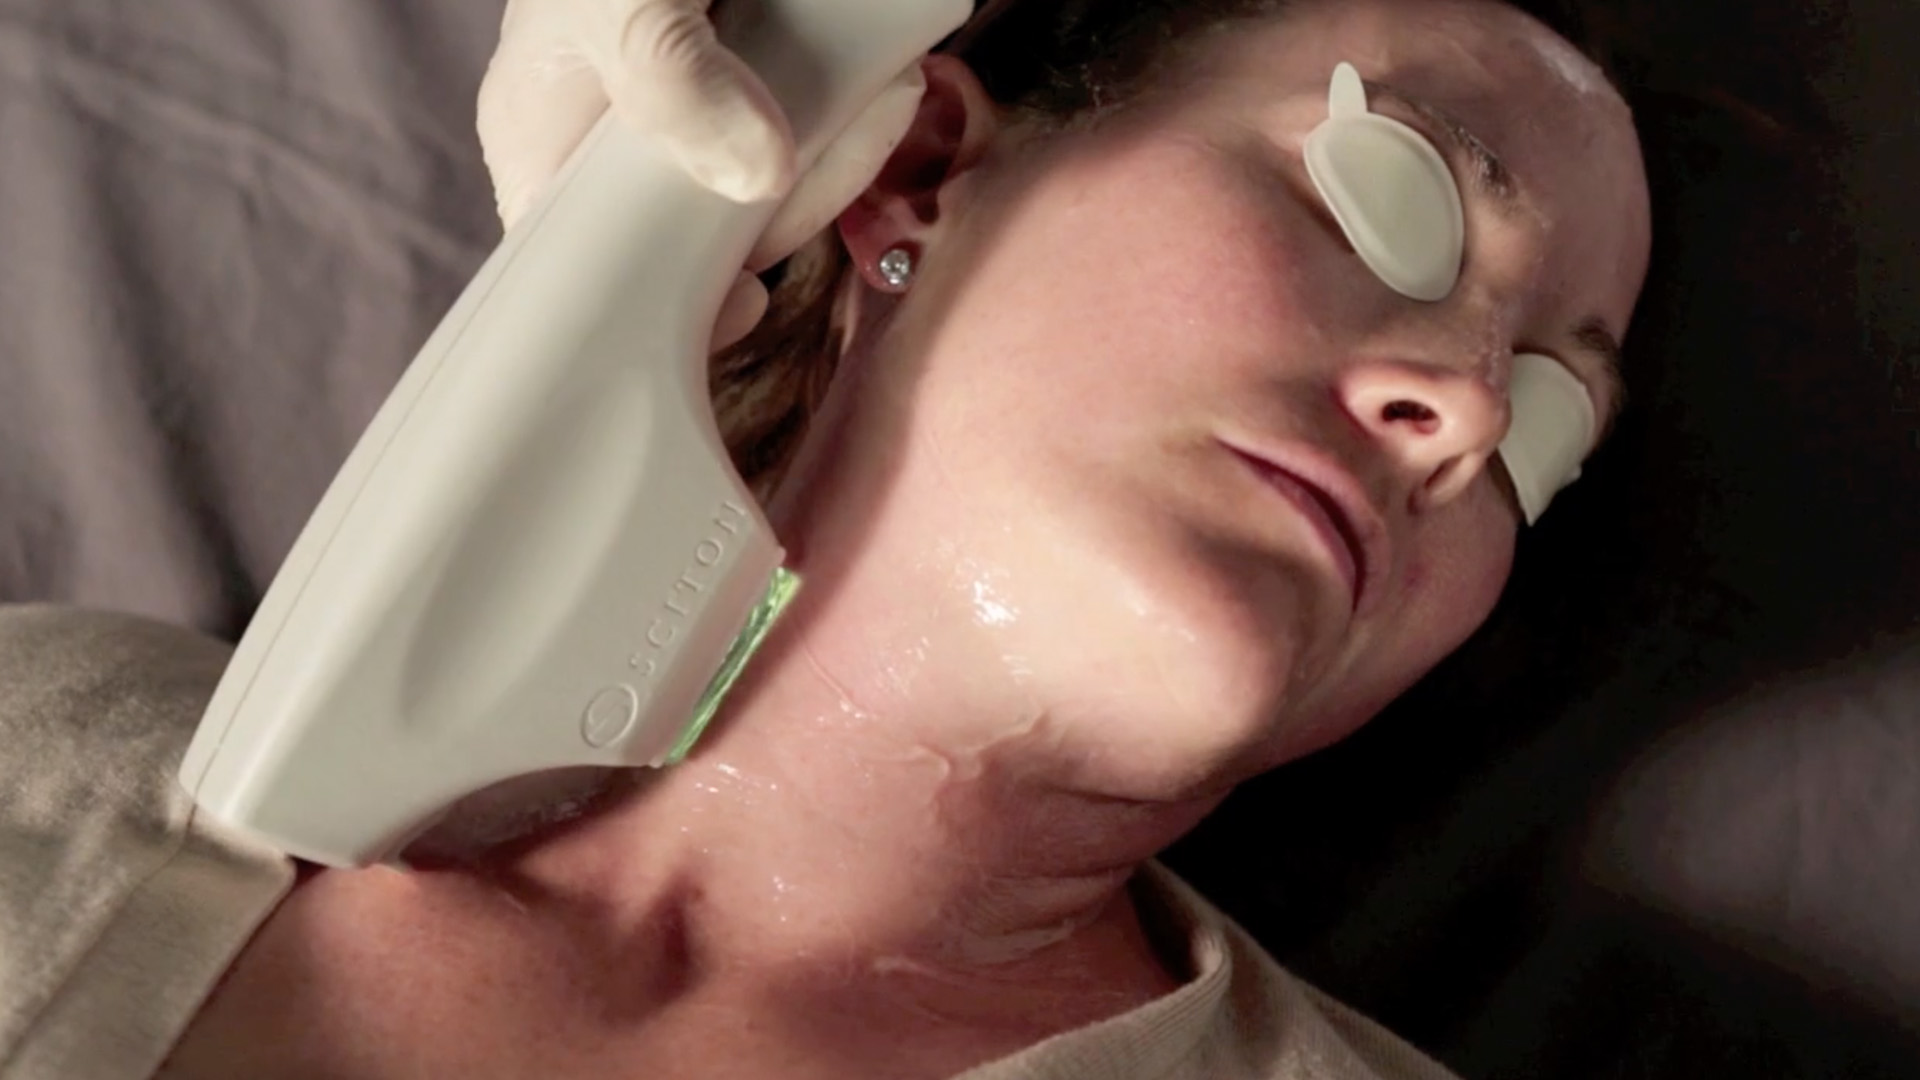 sciton machine being used on woman's face